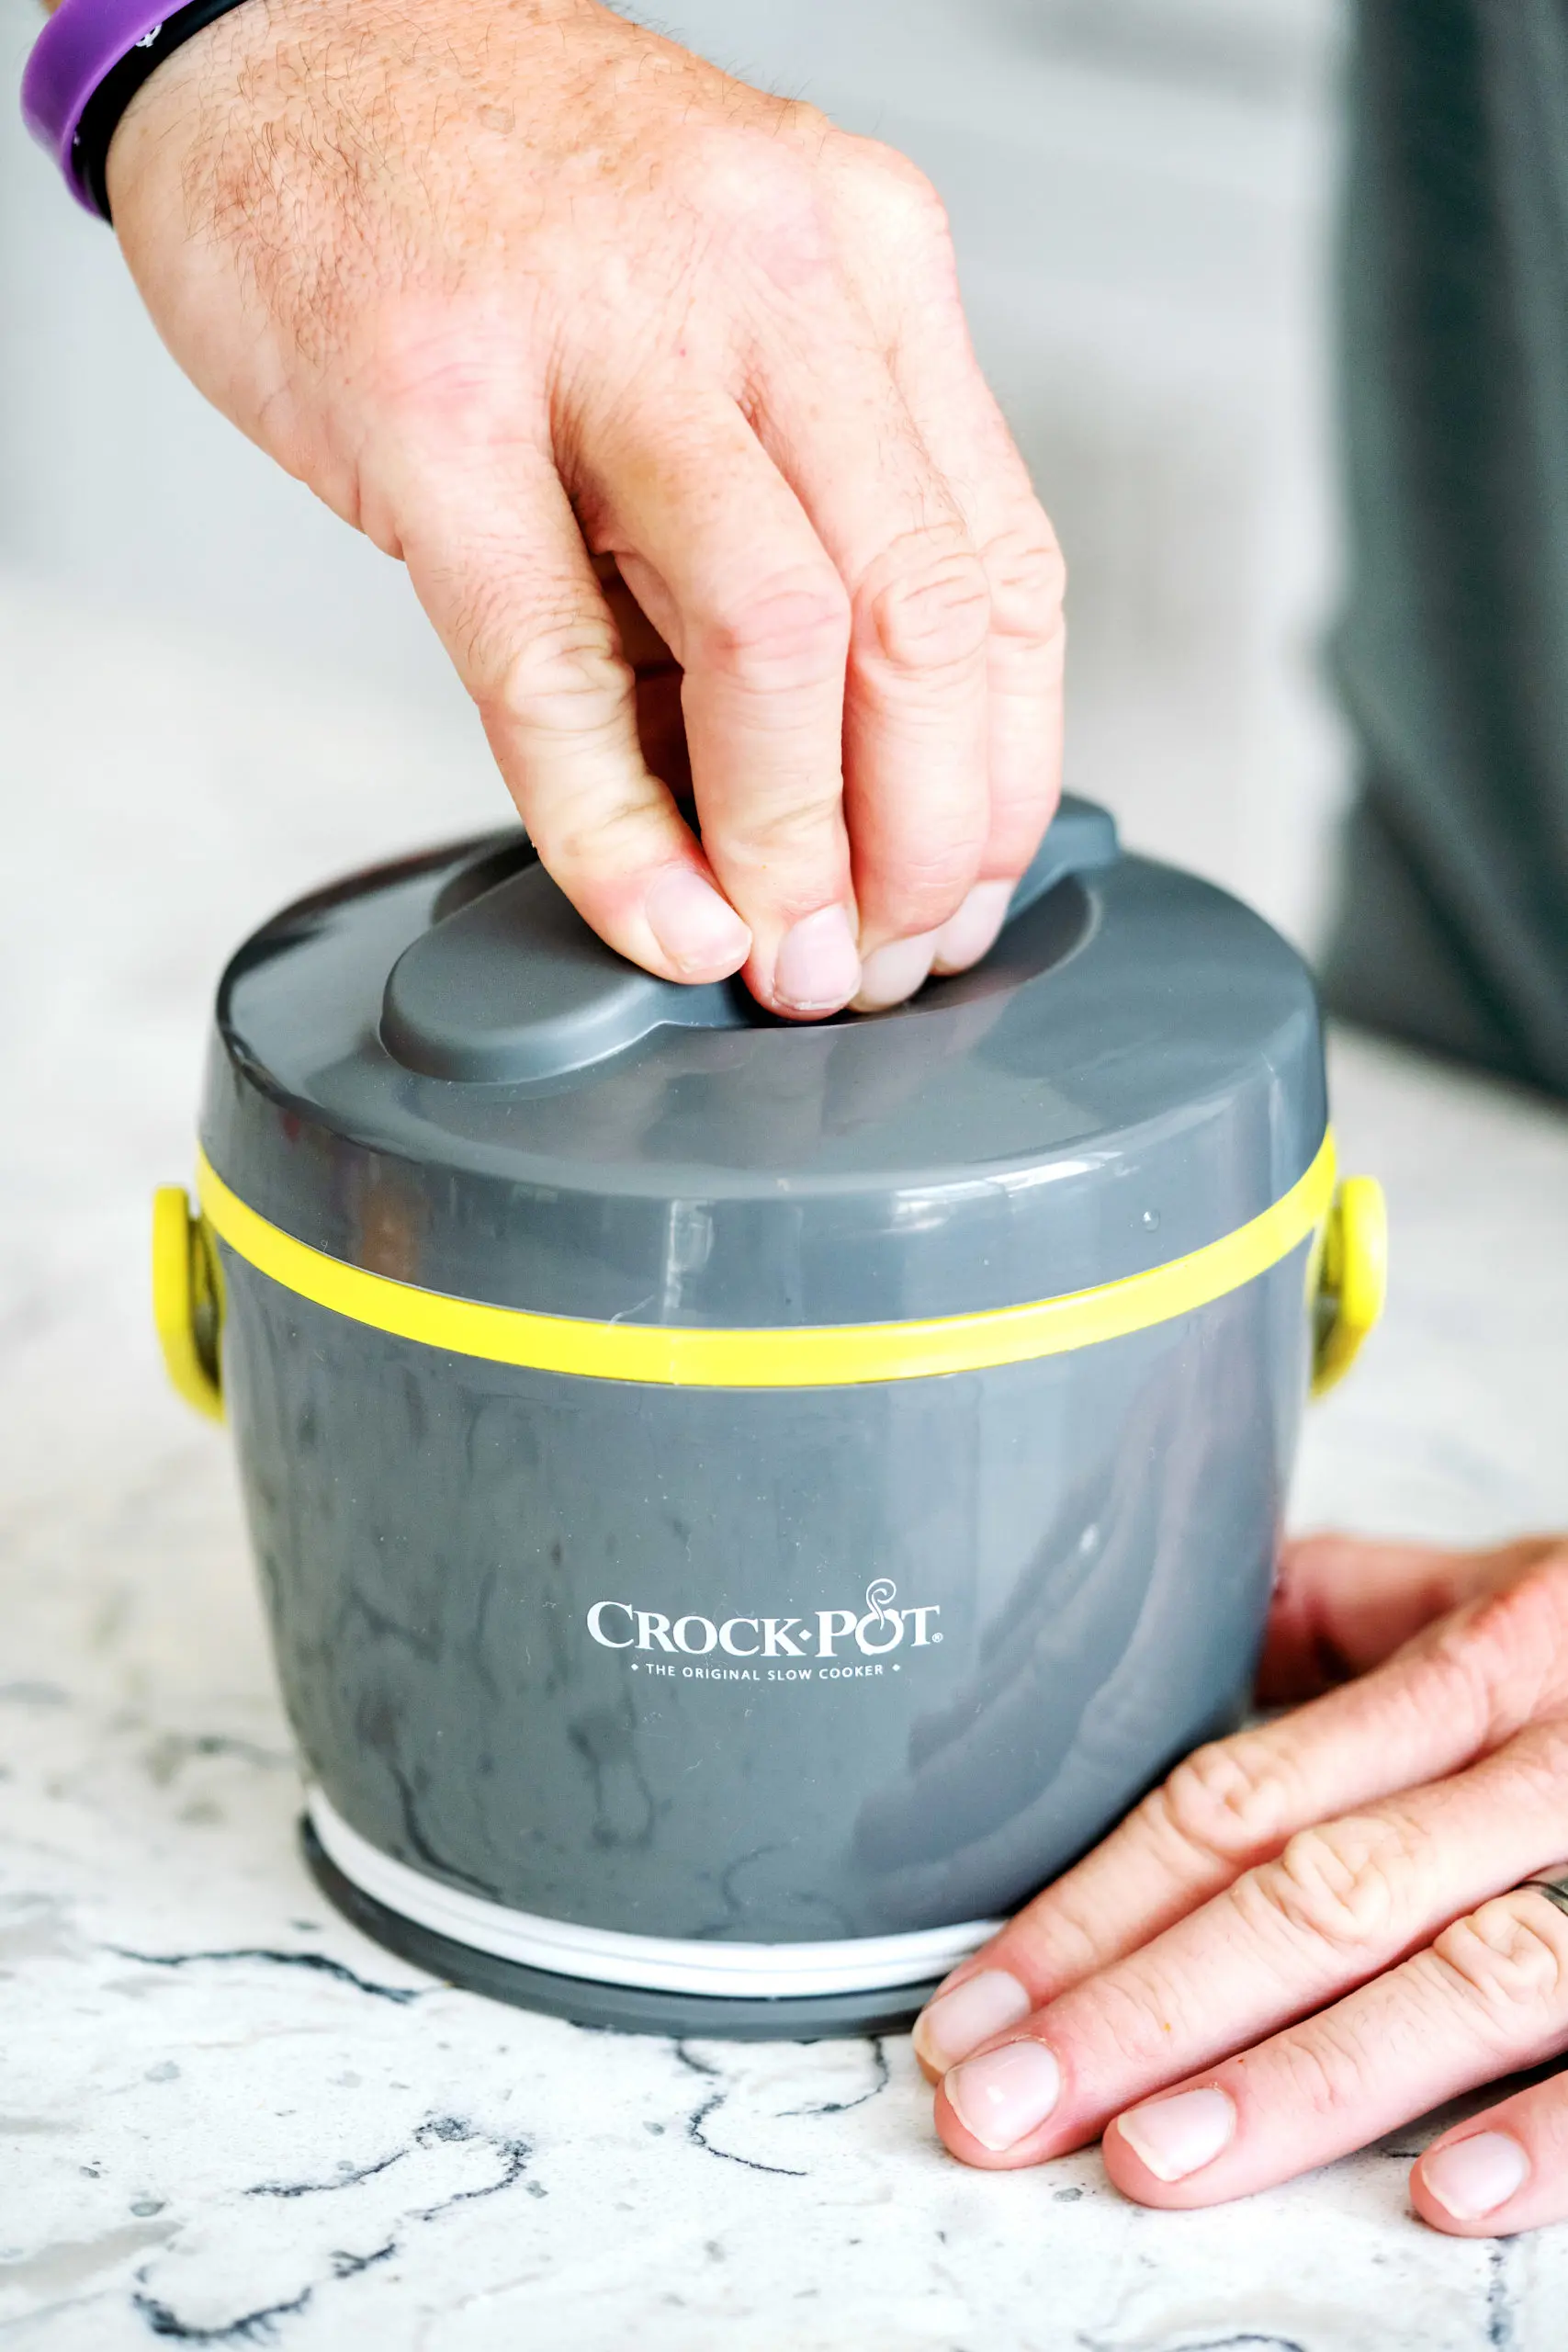 The Crockpot™ Lunch Crock ® Food Warmer is an easy way to make leftove, crock  pot lunch box